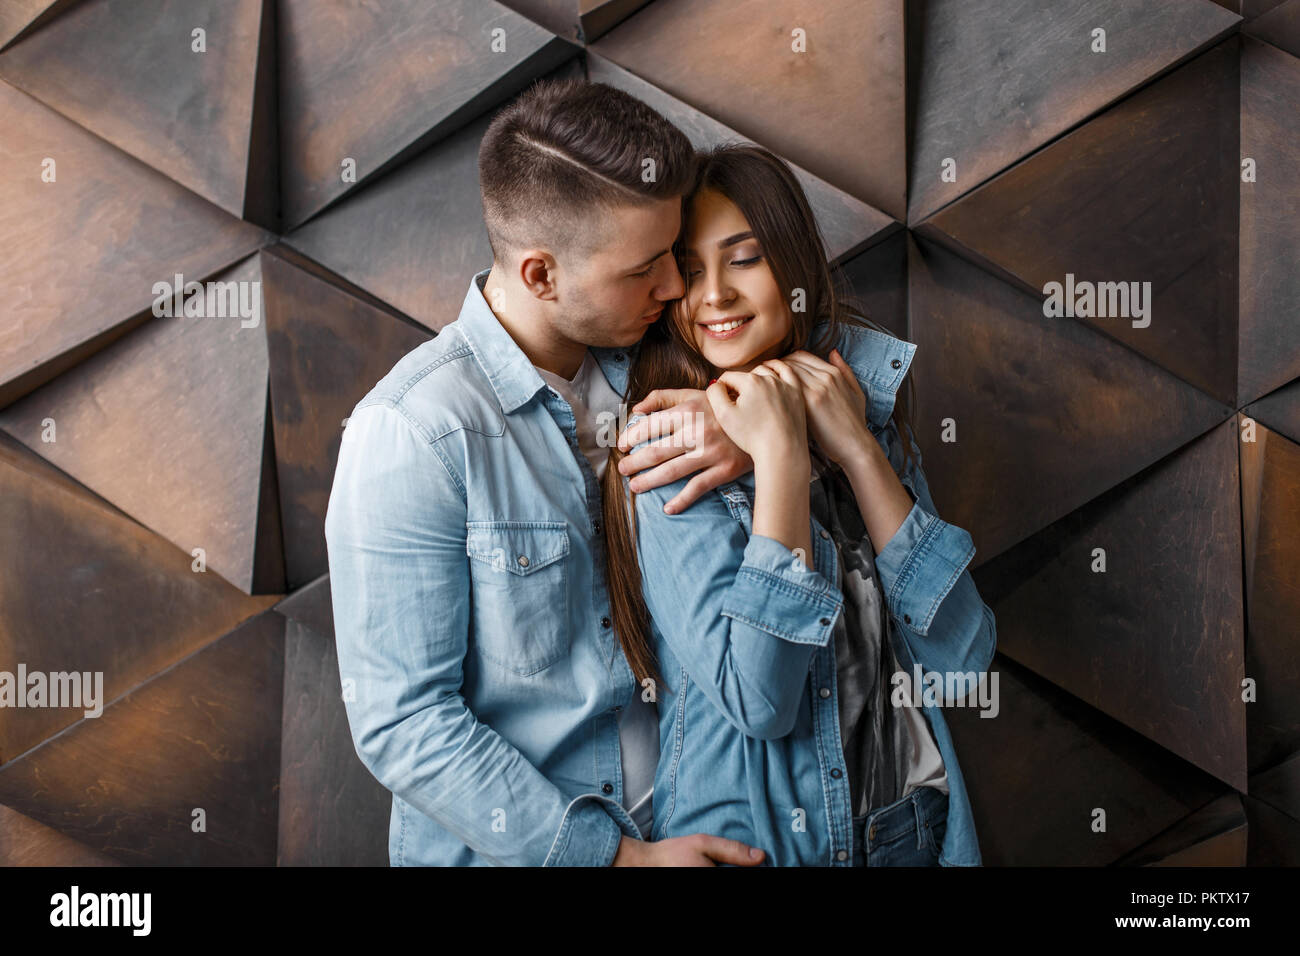 Beautiful happy young couple in blue jeans clothes hug near a wooden patterned wall Stock Photo